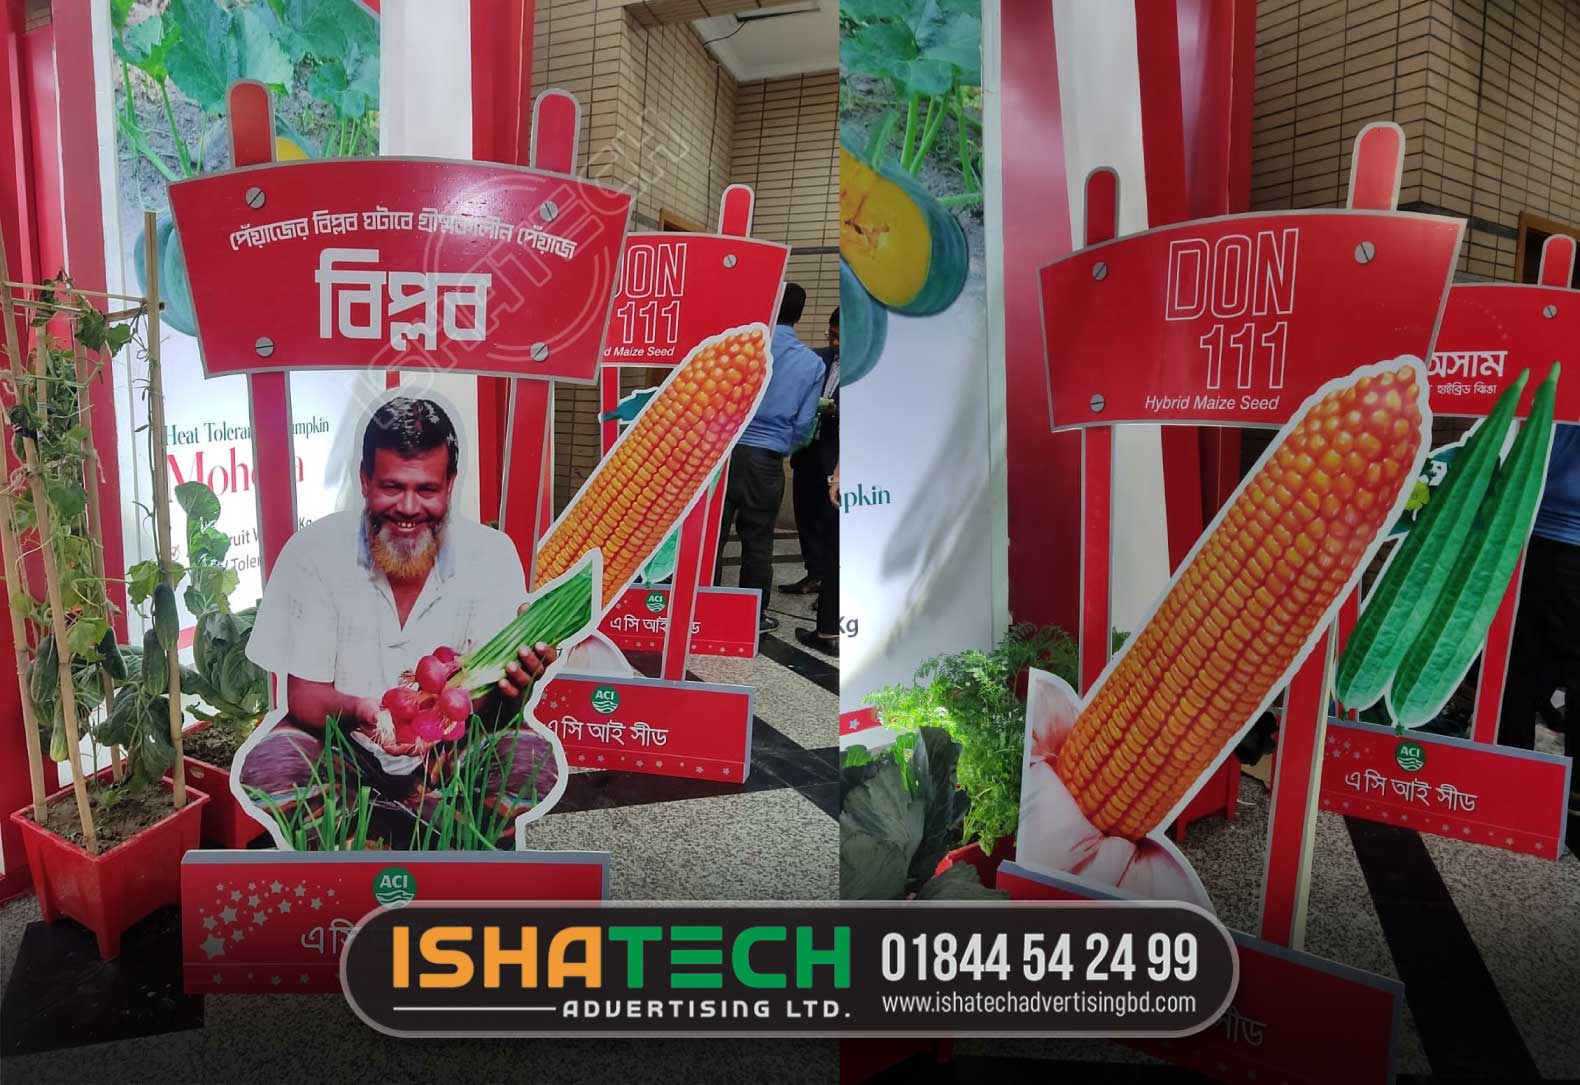 PVC Cut out Board, Fair Stall Design By PVC Out Board, PVC Cut Out & Cutout Board... - IshaTech Advertising Ltd, PVC Sticker Product cutout PVC Inkjet Sticker PVC Board Stand & Vinyl Sticker Stand PVC Board with Fair Stall Wall Sticker Print & Pasting Branding for Indoor Sticker Making in Dhaka. pvc stickers vs vinyl stickers sticker pvc outdoor sticker pvc vinyl pvc sticker vinyl sticker paper in bangladesh